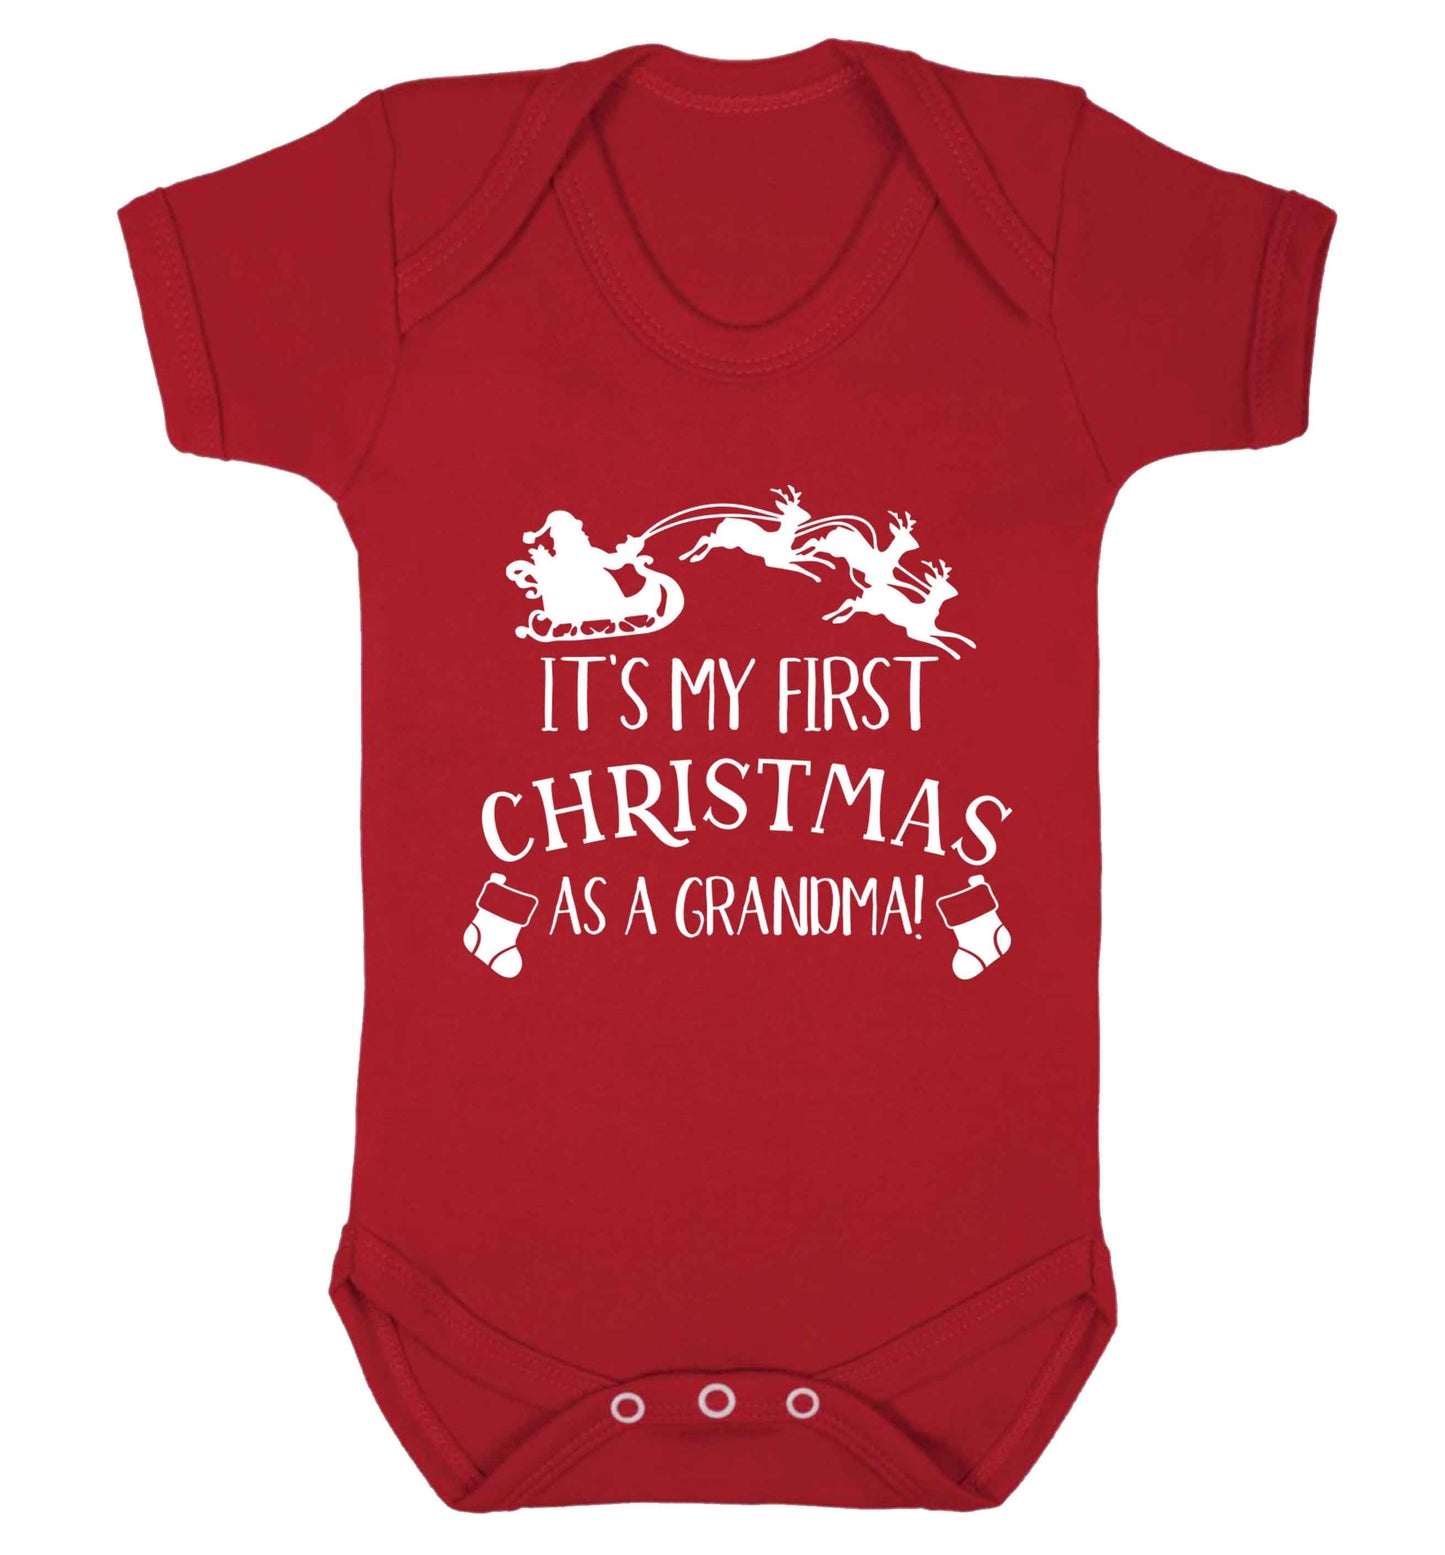 It's my first Christmas as a grandma! Baby Vest red 18-24 months